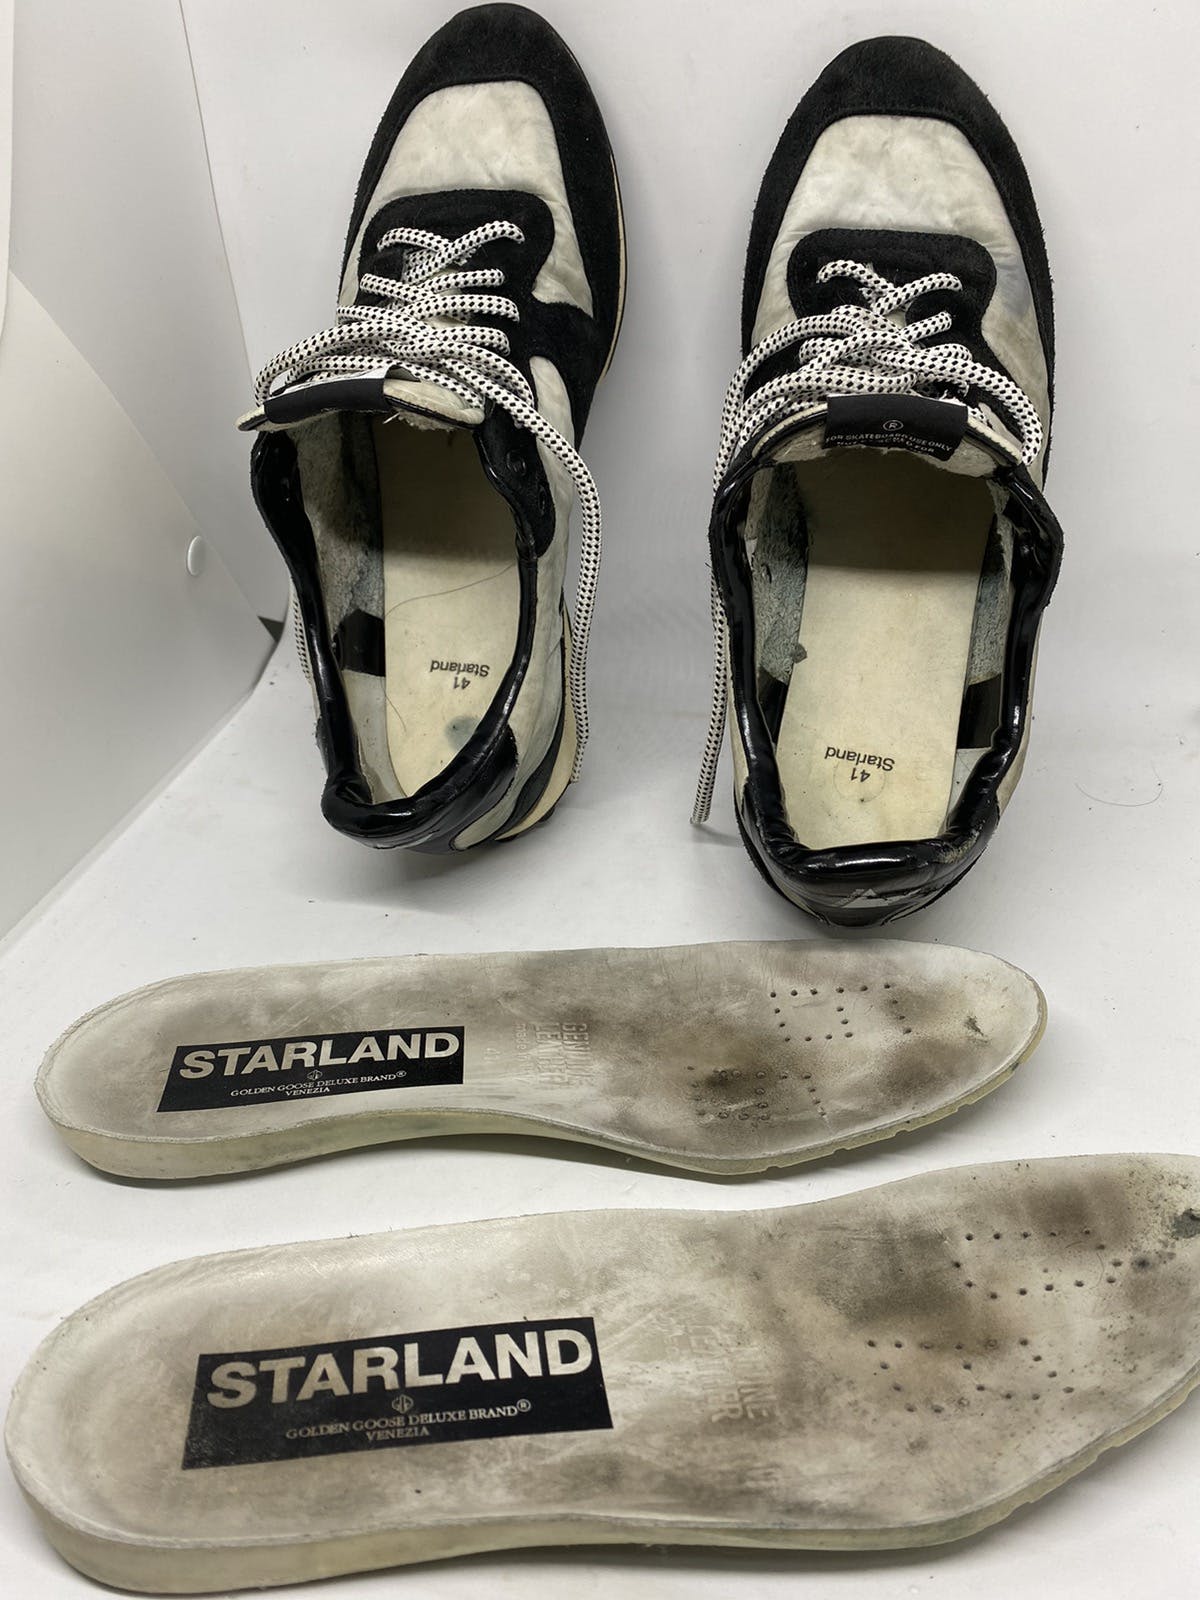 GGDB Golden Goose Deluxe Brand Starland size 41 - 10